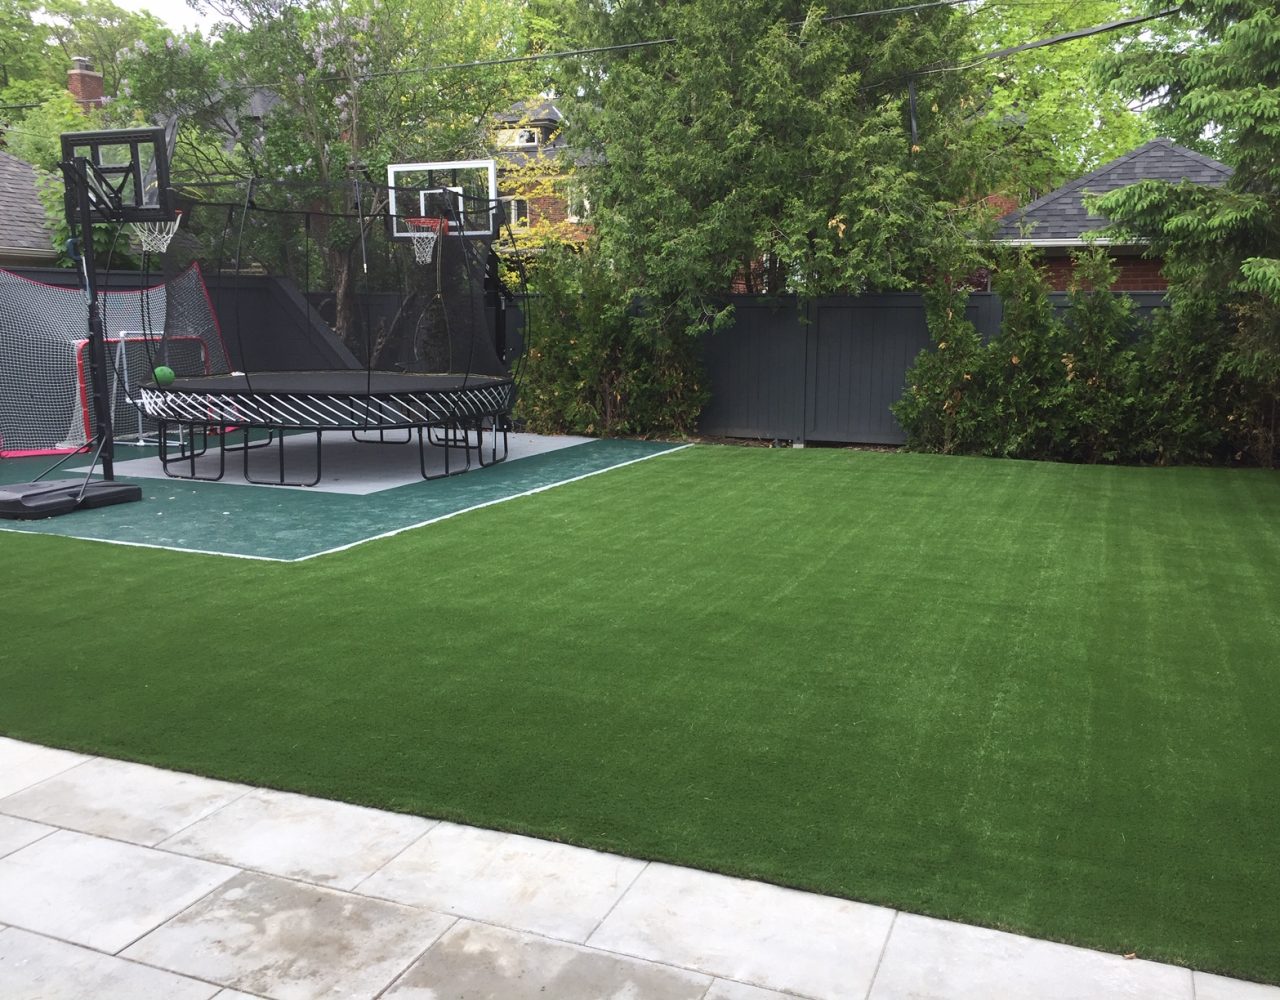 basketball trampoline are no problem with artificial grass